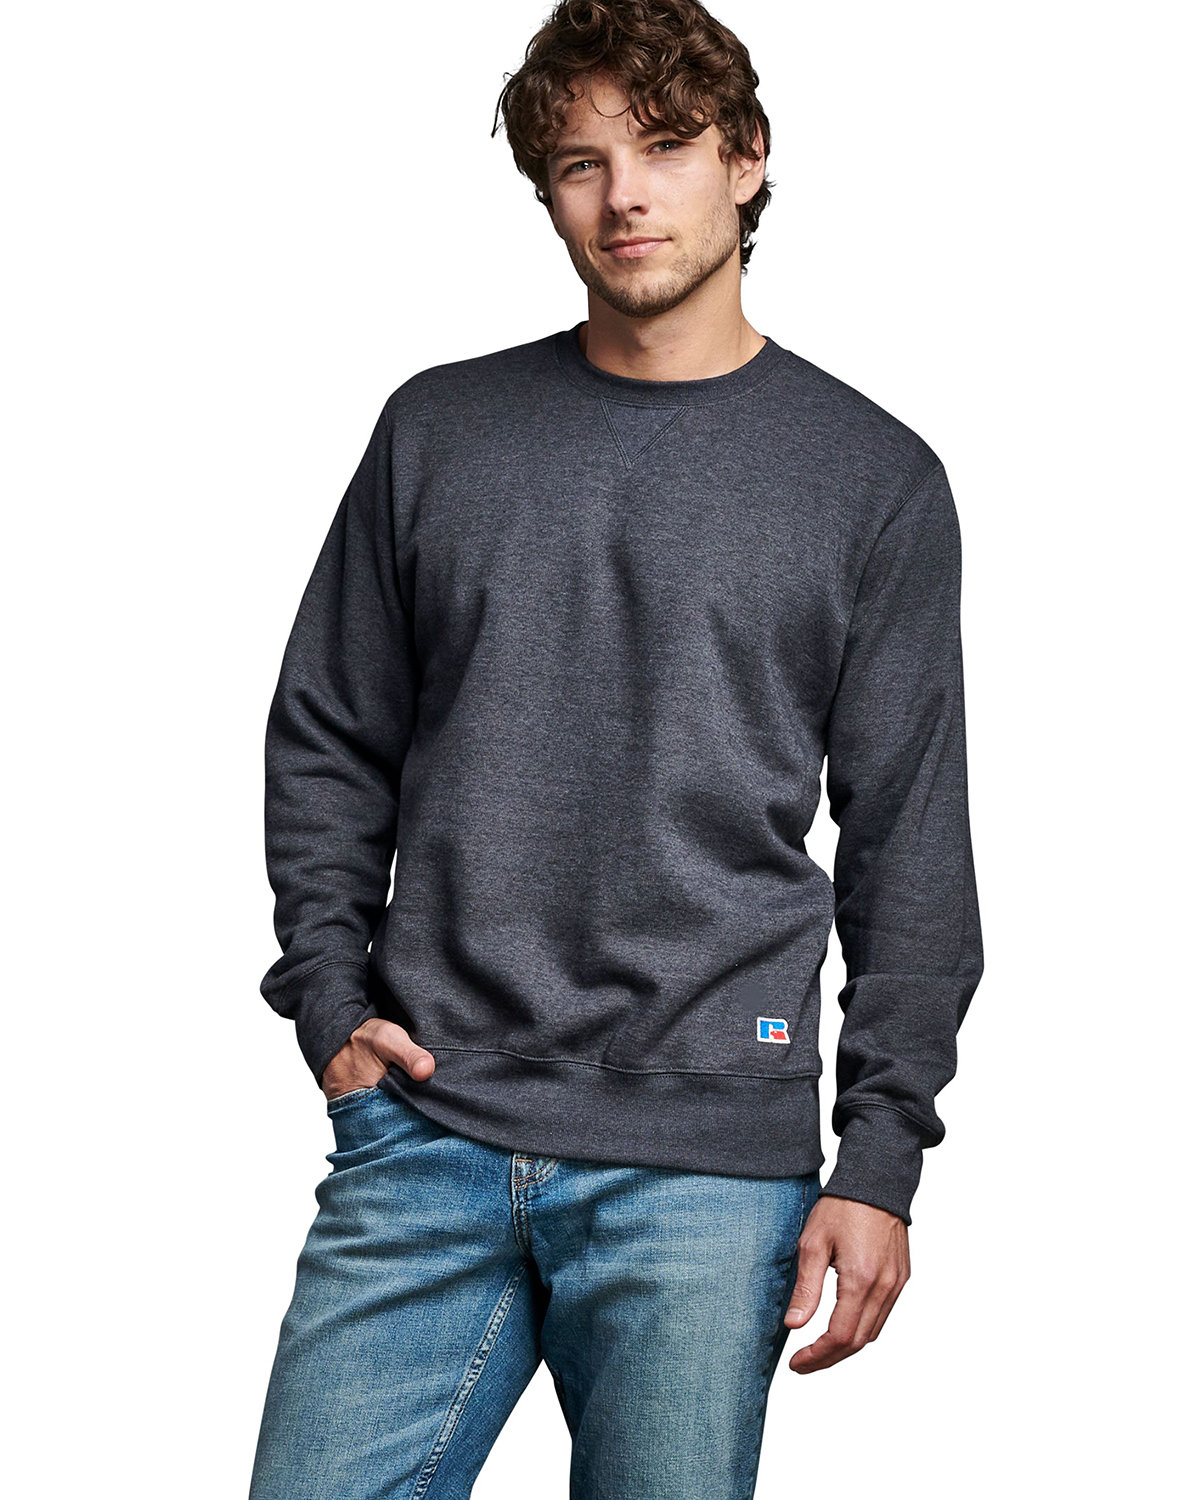 Russell Athletic Unisex Cotton Classic Crew Sweatshirt CHARCOAL HEATHER 